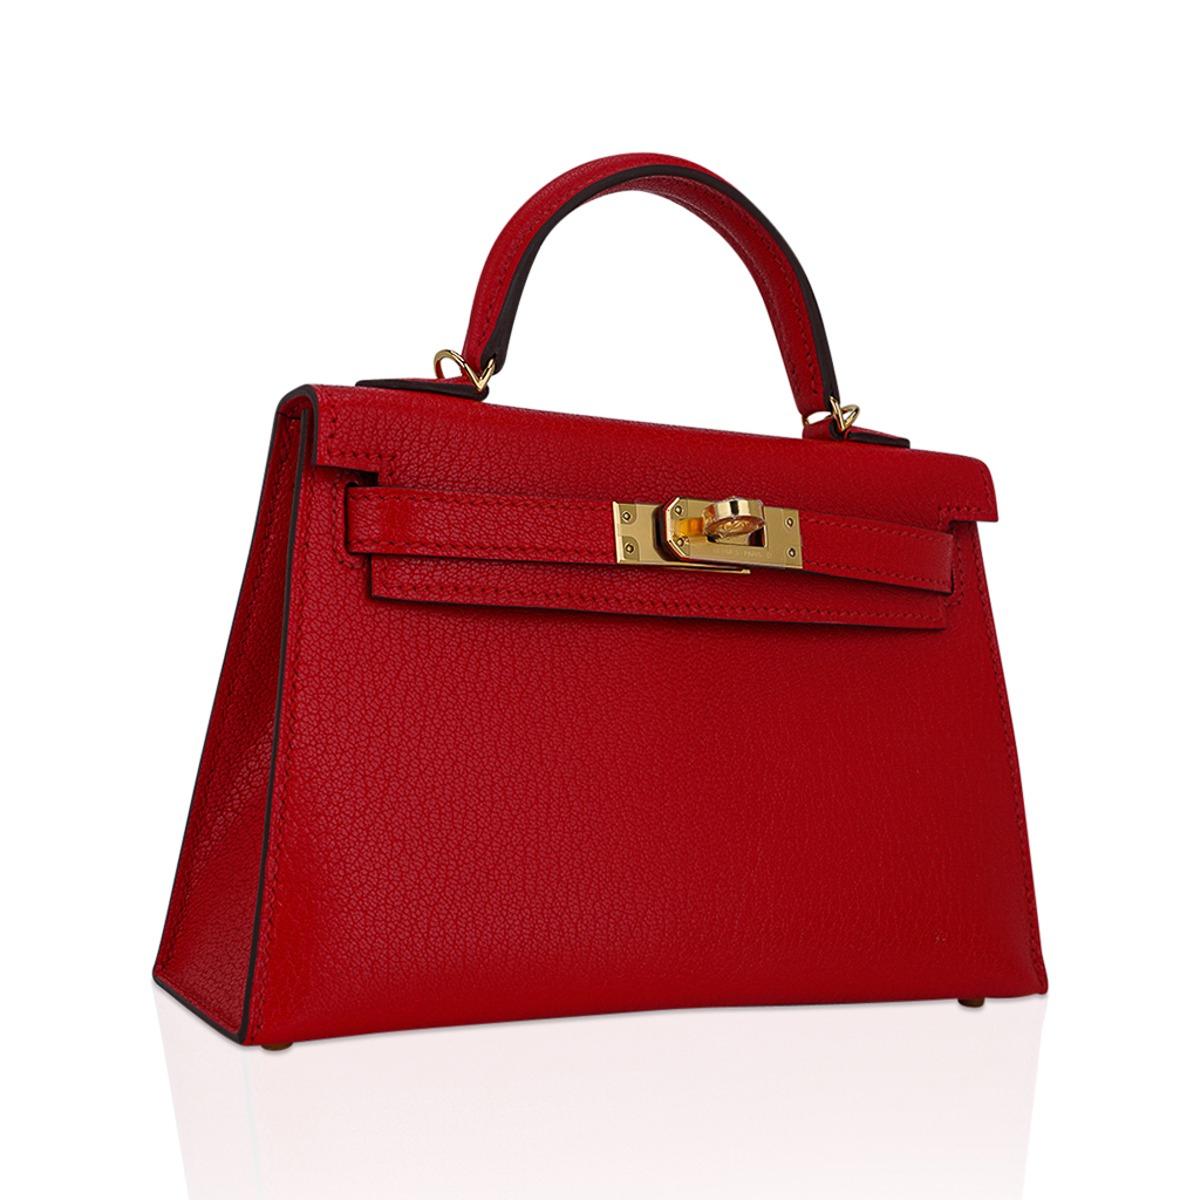 Mightychic offers an Hermes Kelly 20 Sellier bag featured in stunning Rouge de Coeur.  
Vibrant and richly saturated. this true red Hermes Kelly Mini 20 bag will set your heart aflutter.
Chevre leather has an exotic natural grain  and shows colours